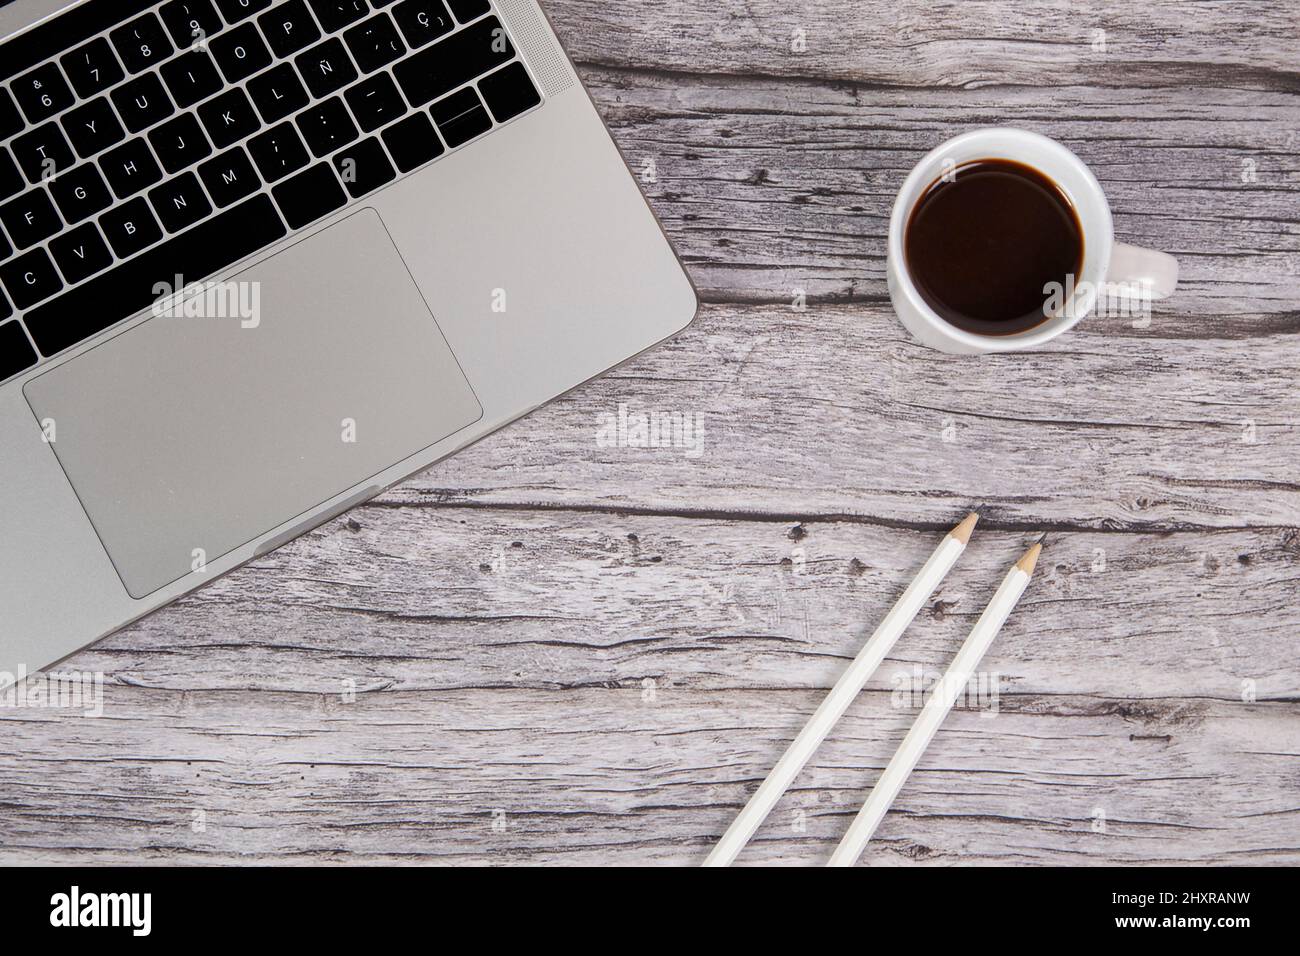 Top view of an office desk with a laptop and a cup of coffee. Stock Photo